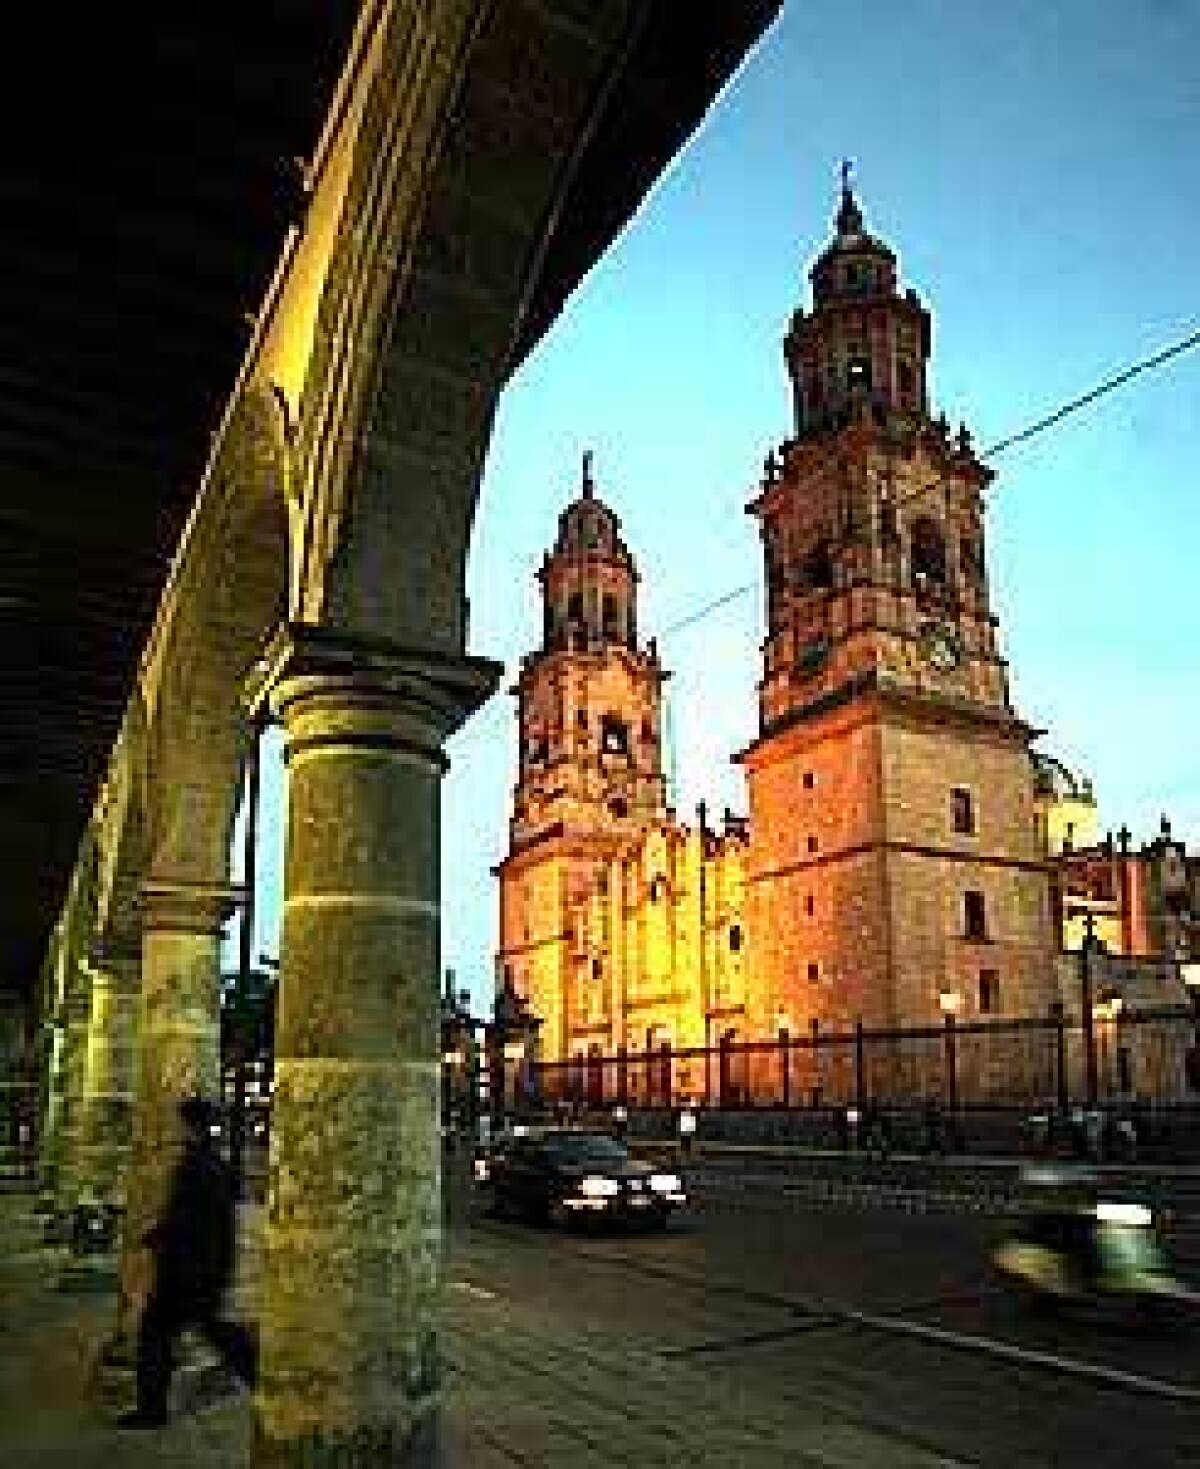 Morelia's main cathedral is one of Mexico's three largest. The city's historic district encompasses 120 blocks, and its architecture spans more than four centuries.